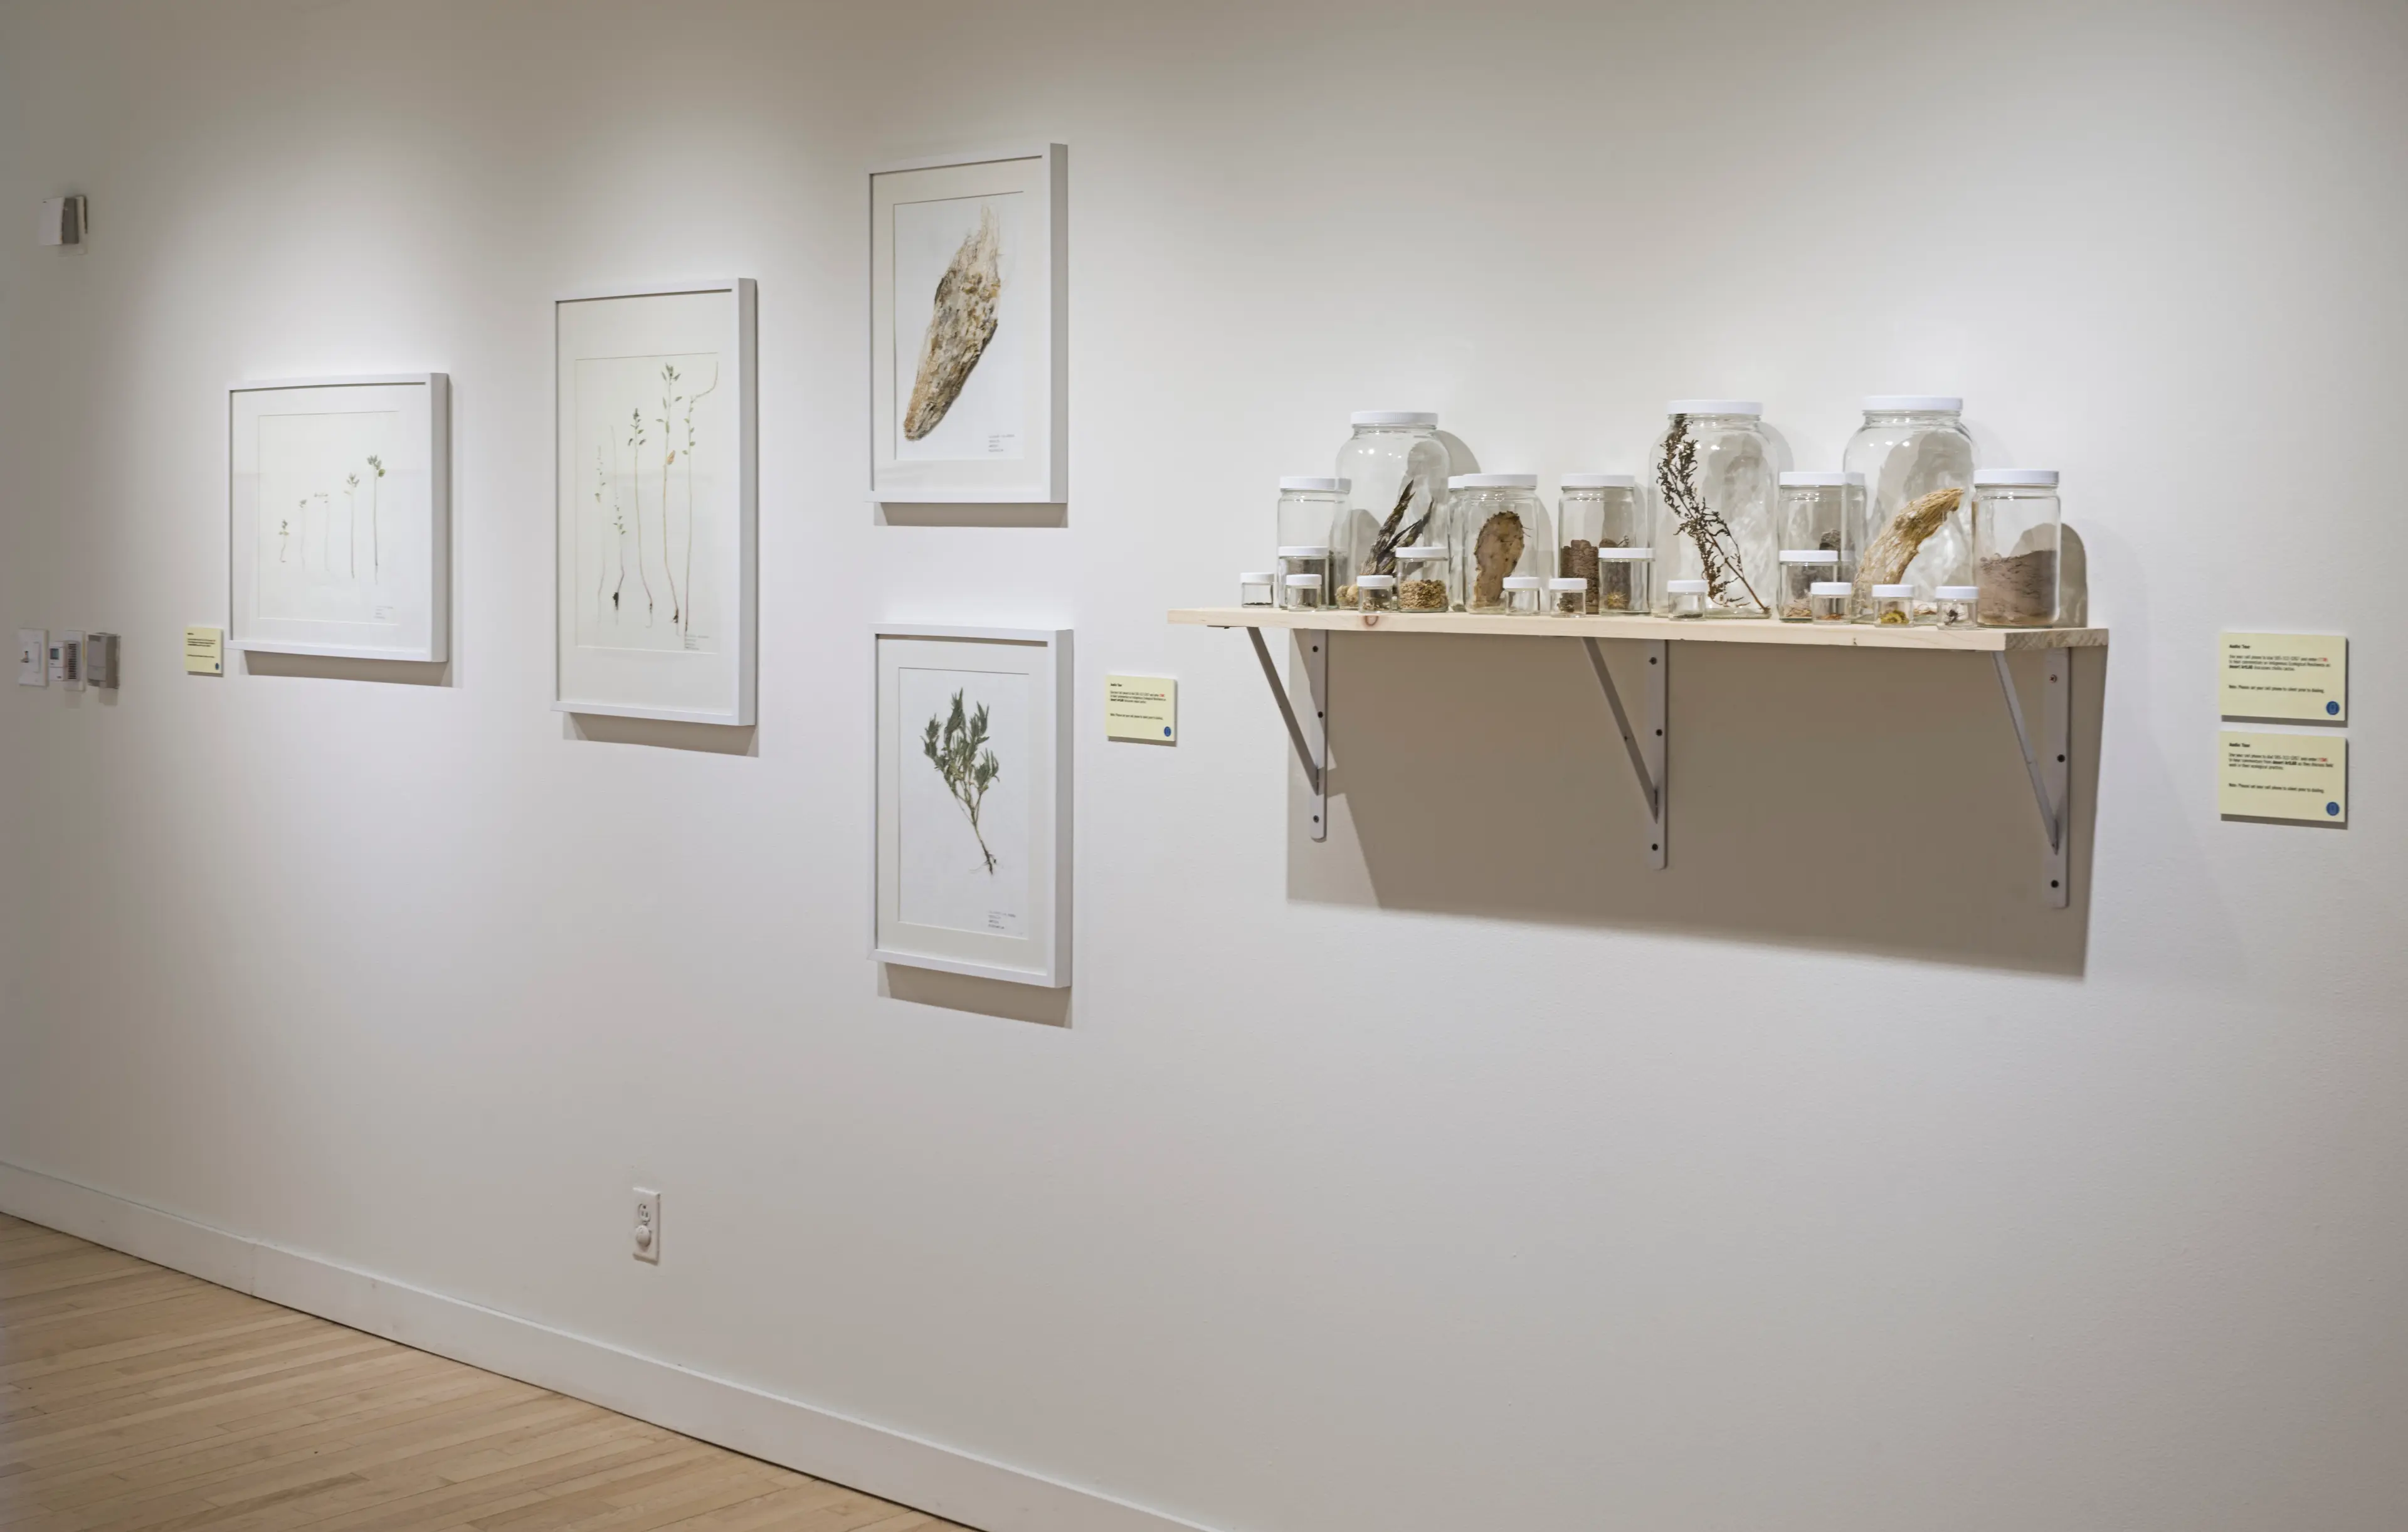 Photo of gallery with four images of desert plants hanging. To the right of the images is a shelf with many desert vegetation in glass jars.